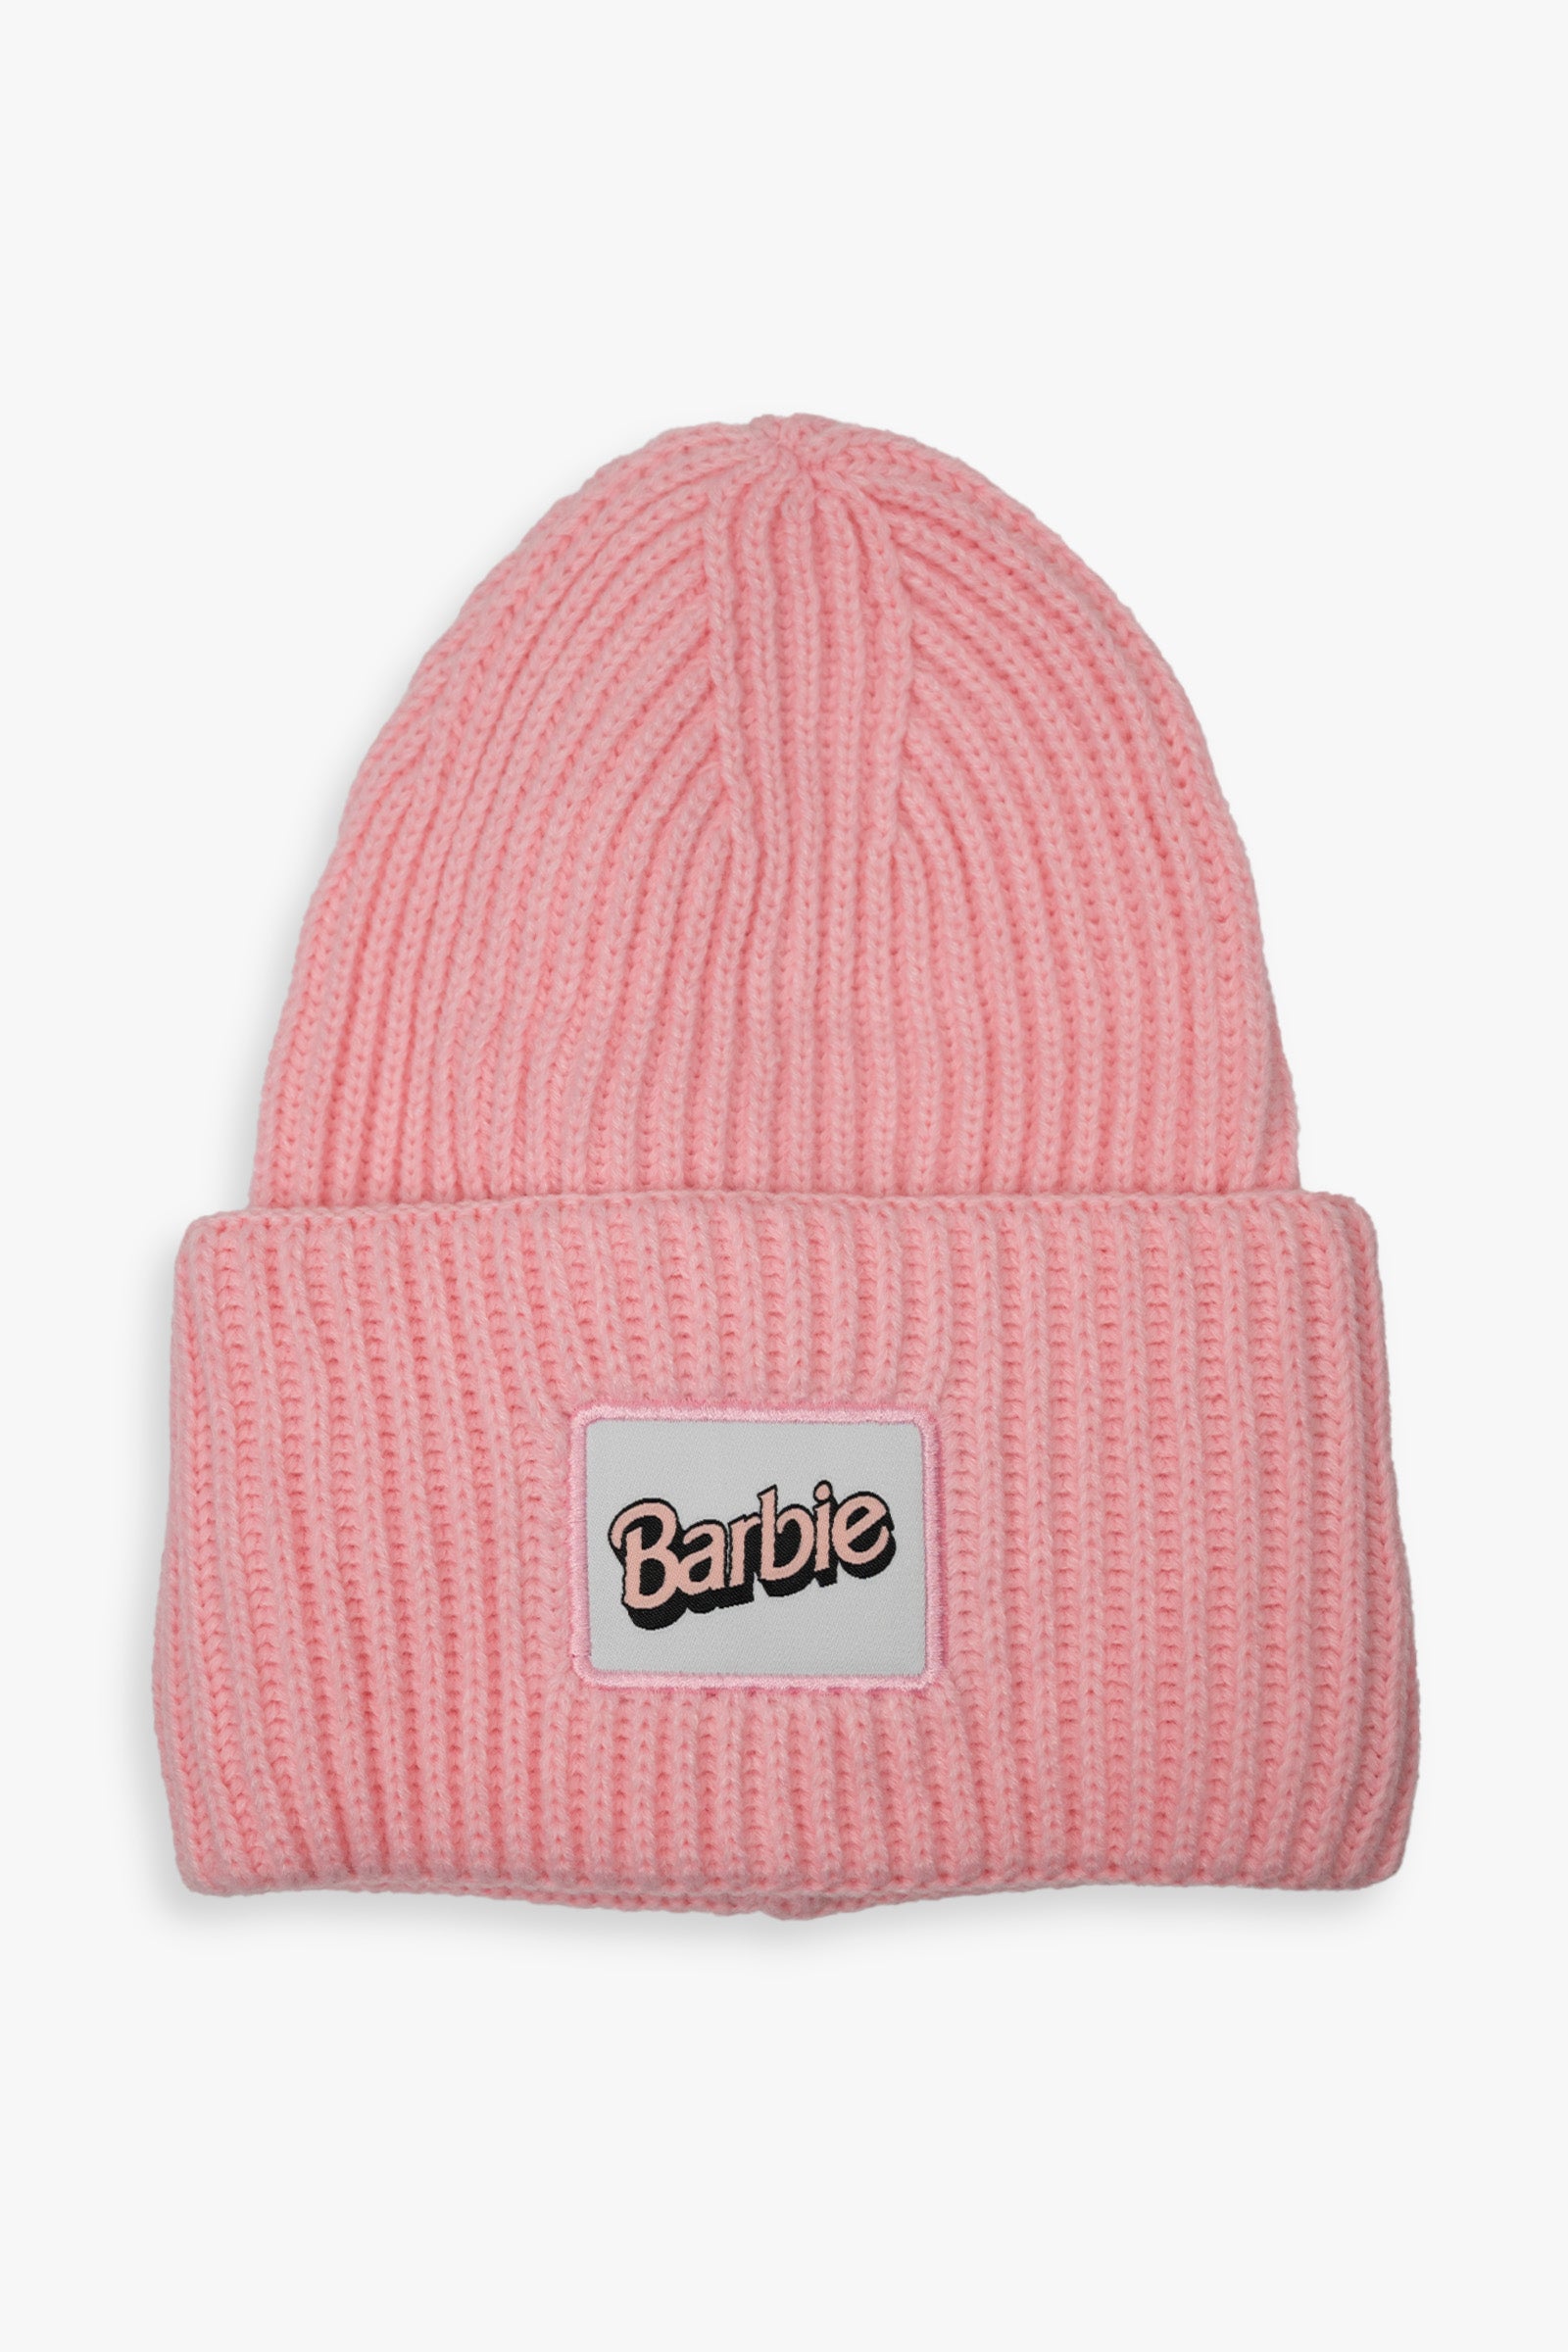 Gertex Barbie Ladies Oversized Cuff Beanie Featuring a Woven Patch